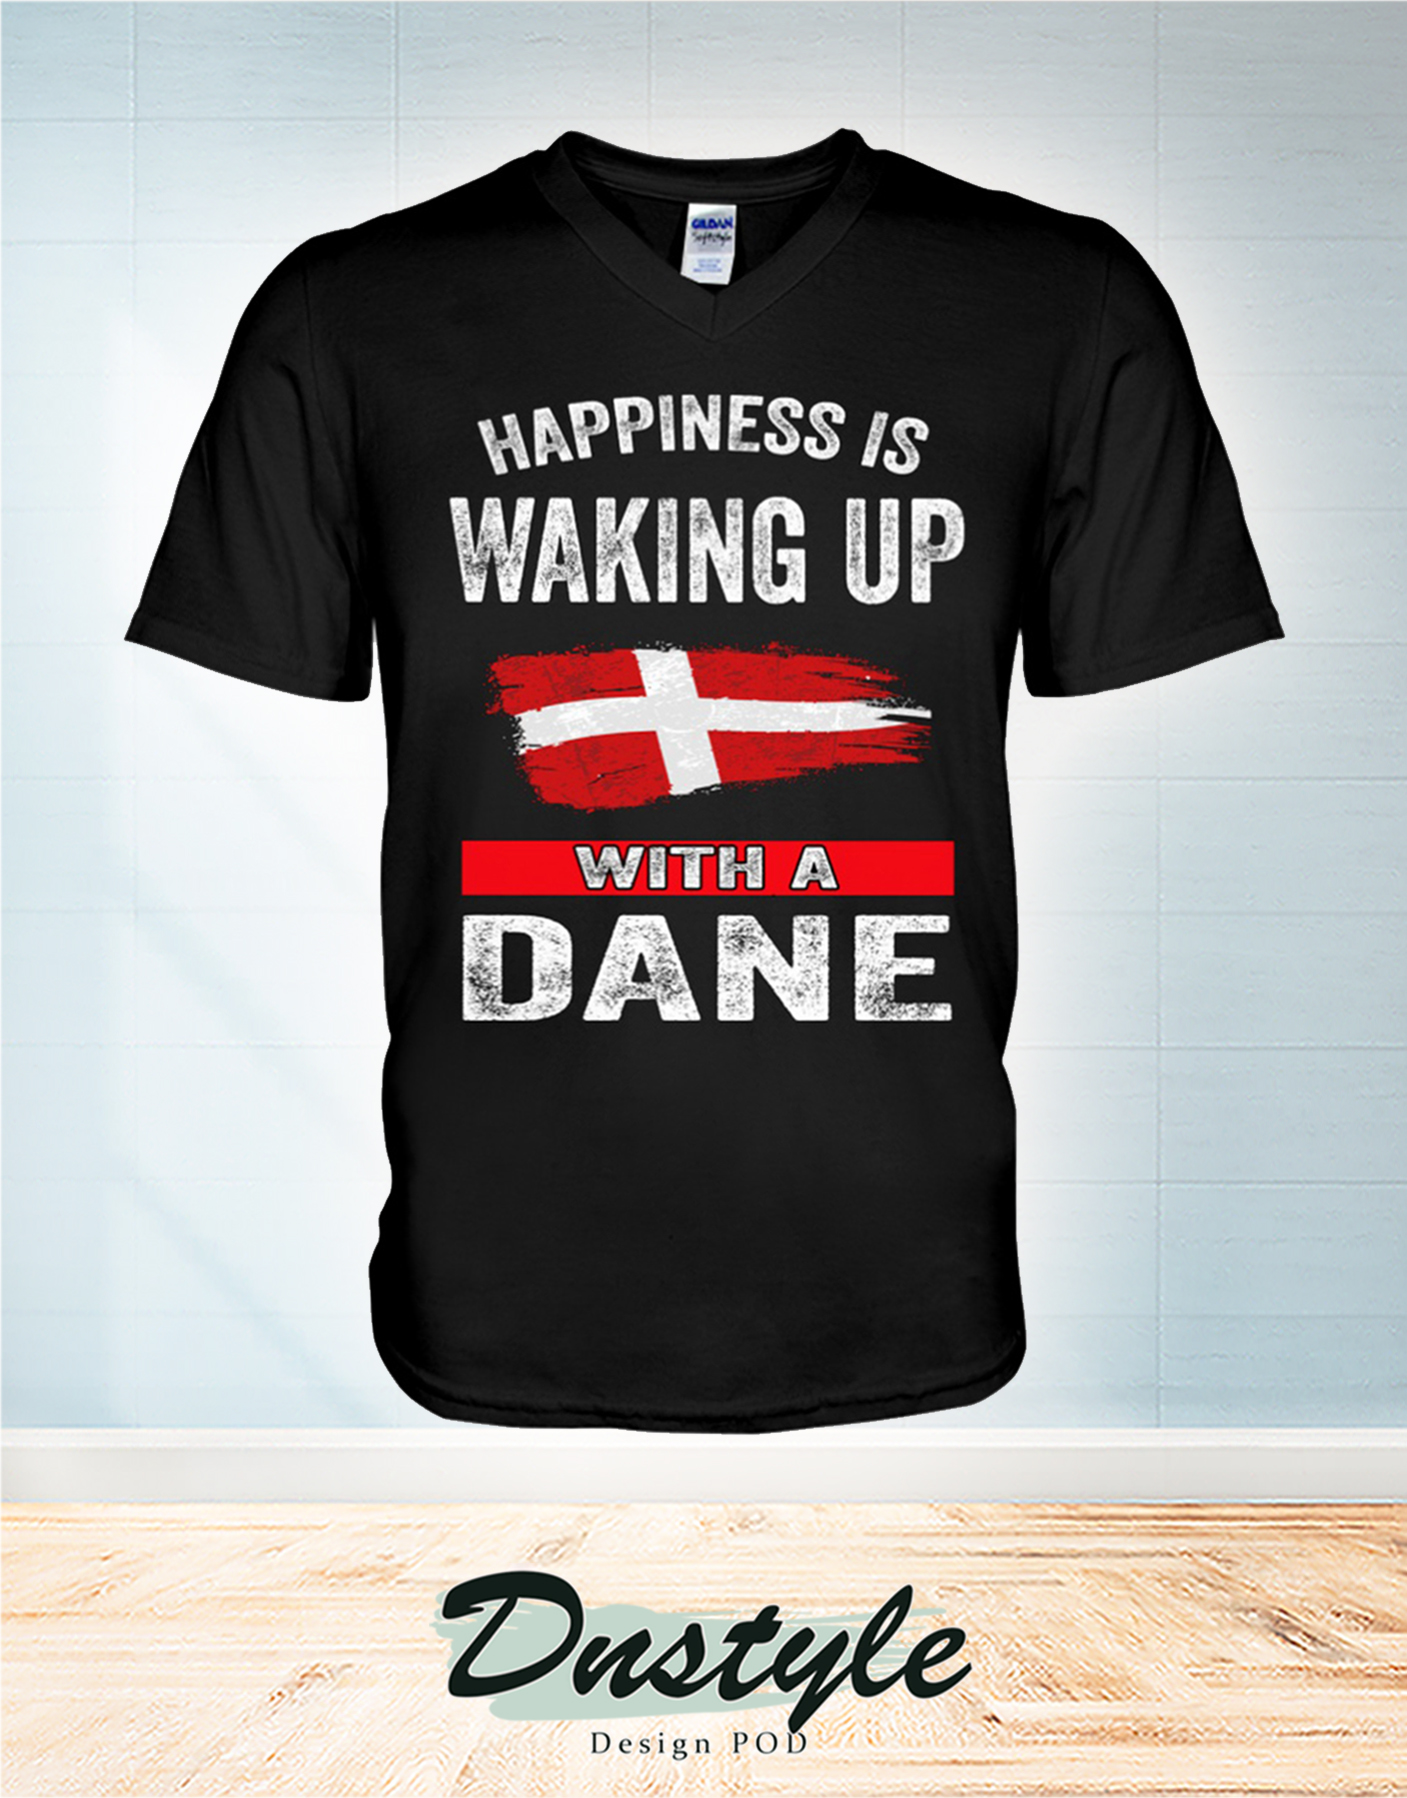 Happiness is waking up with a Dane t-shirt